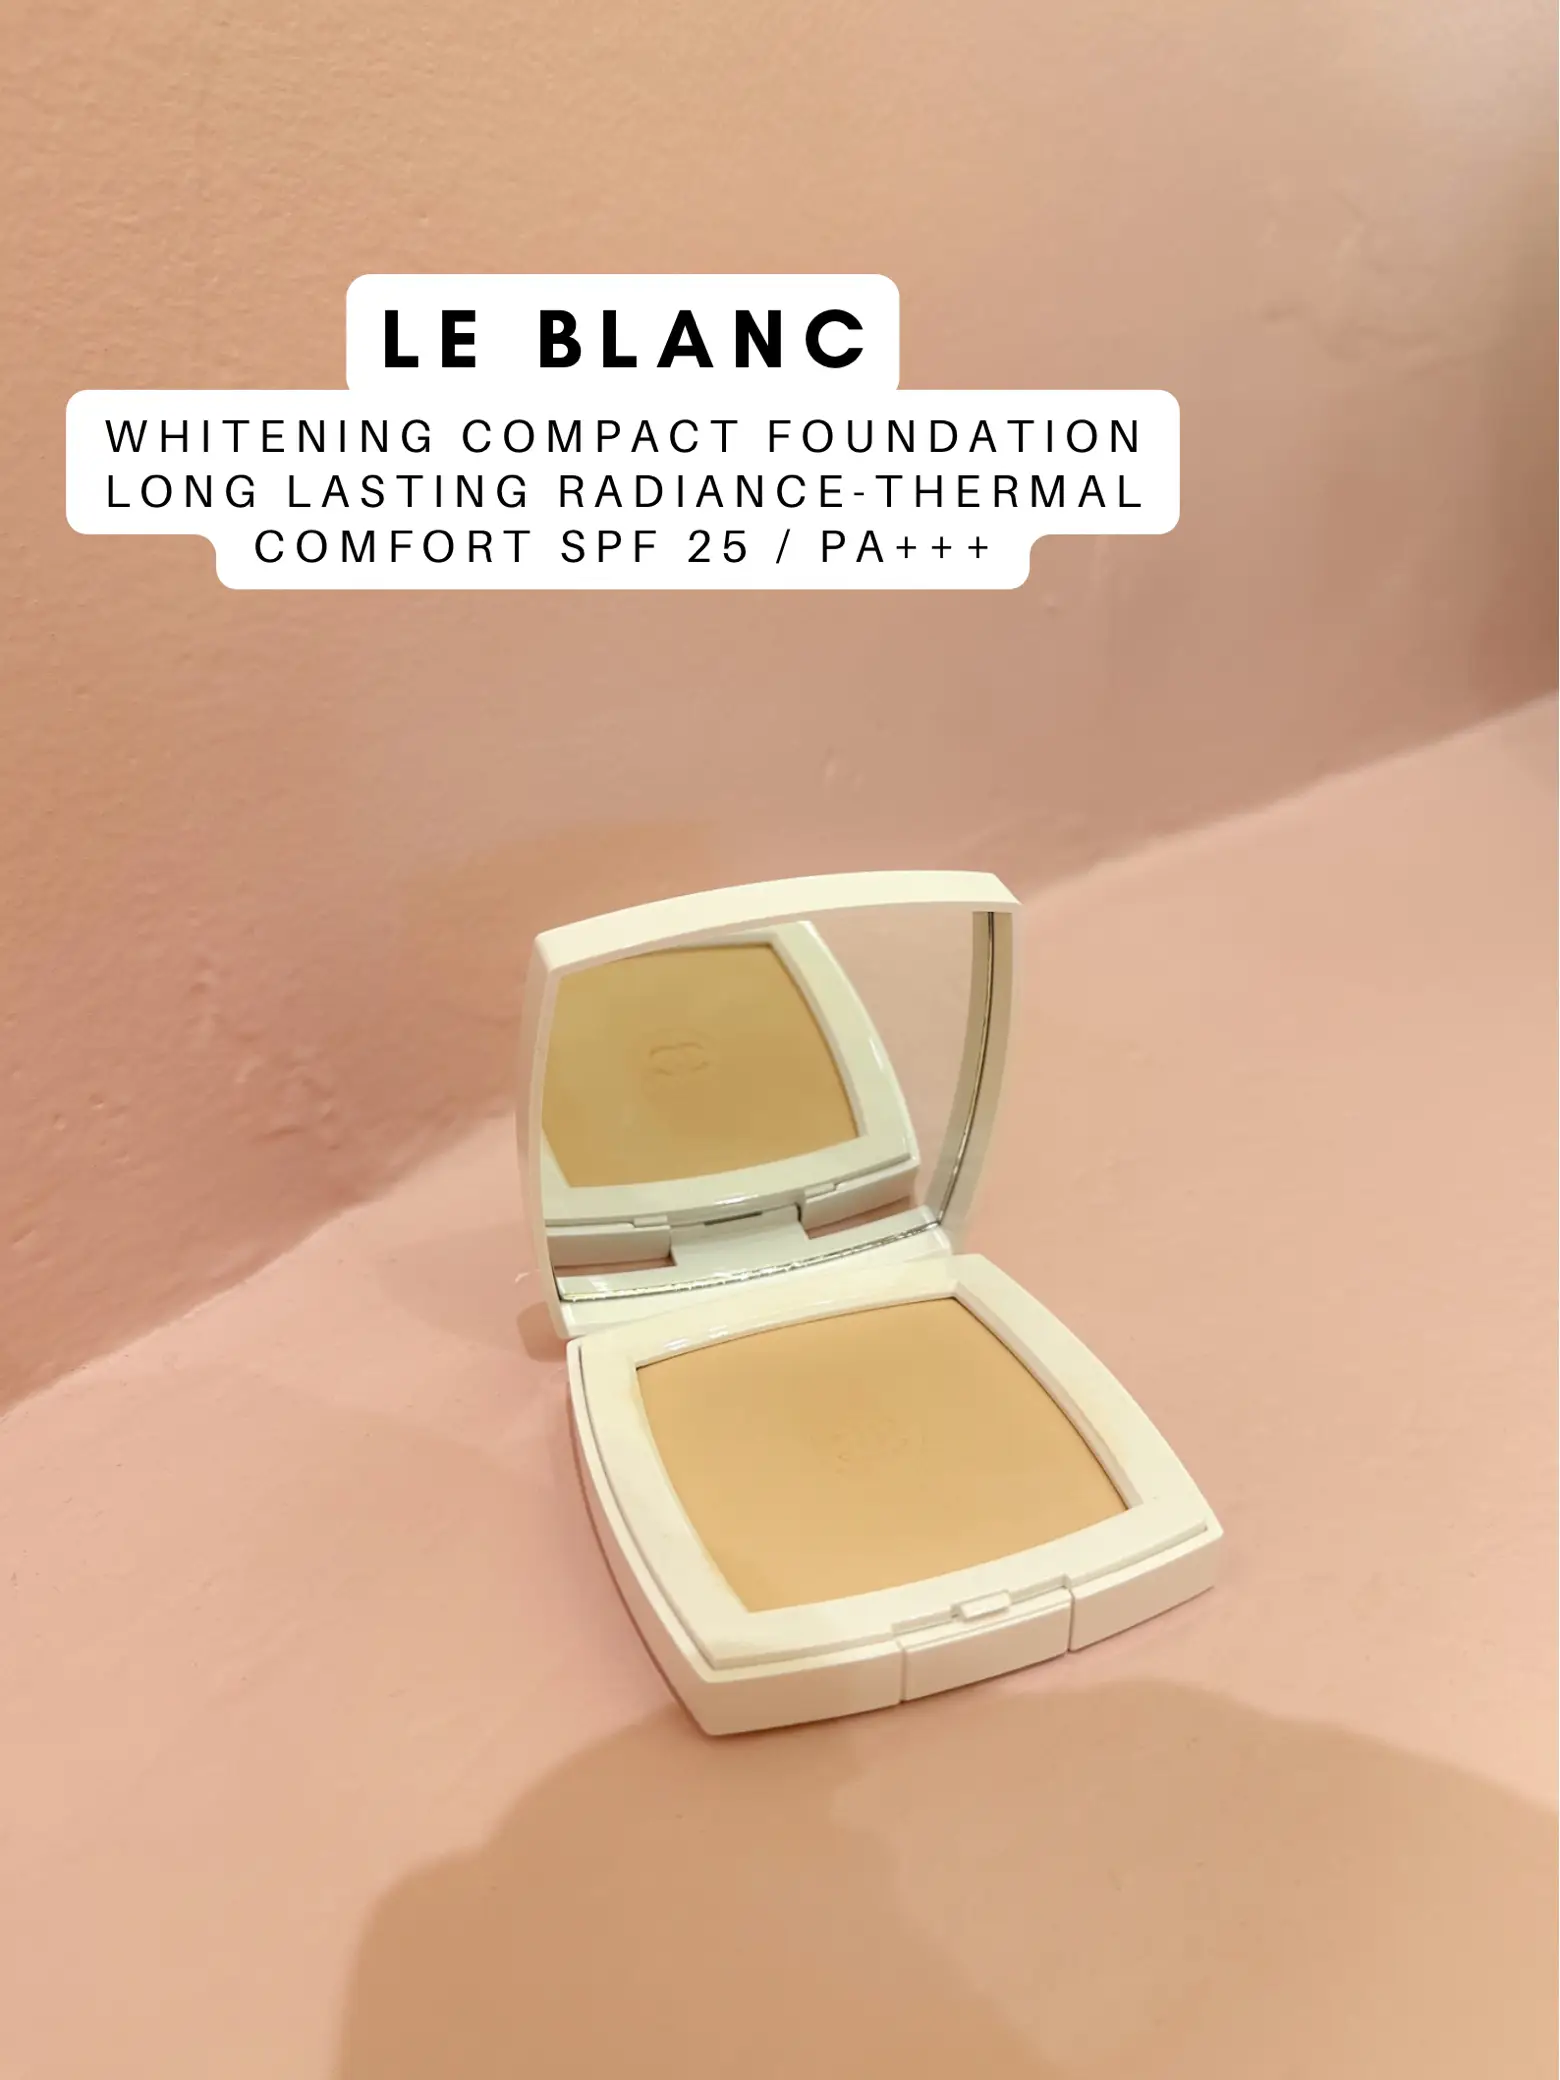 Chanel Compact Foundation. Which one is the best??